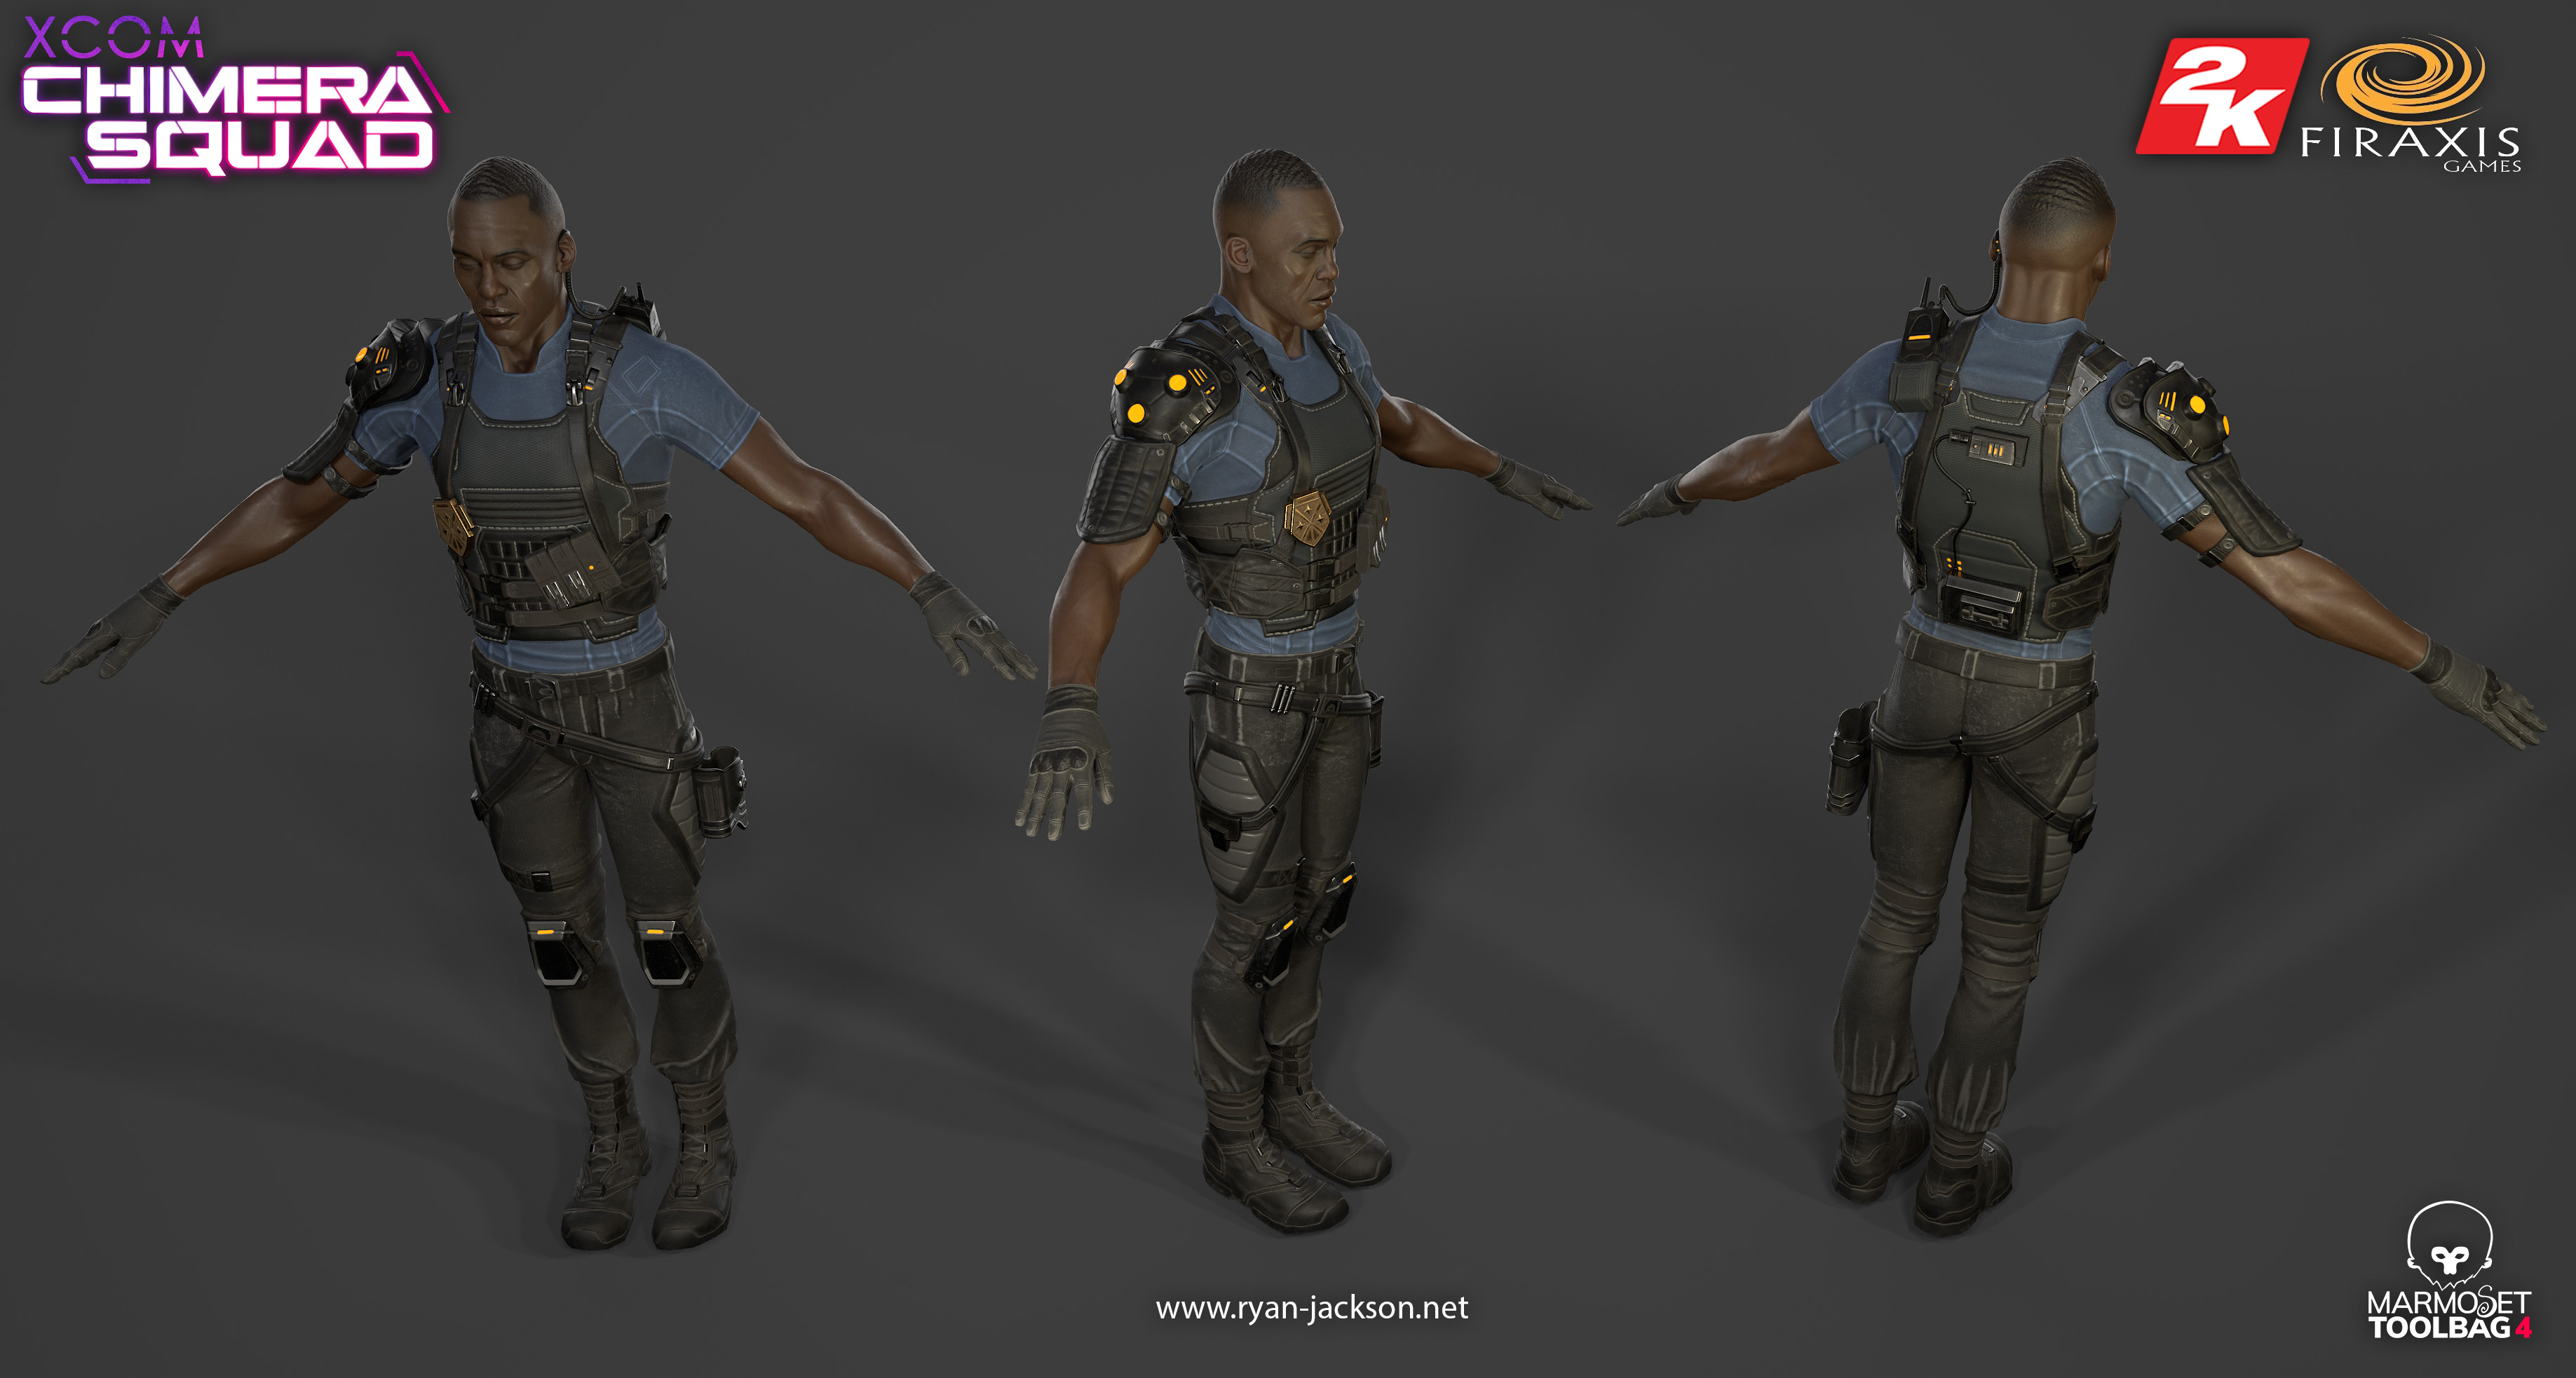 BlueBlood fully textured, and presented here in marmoset.